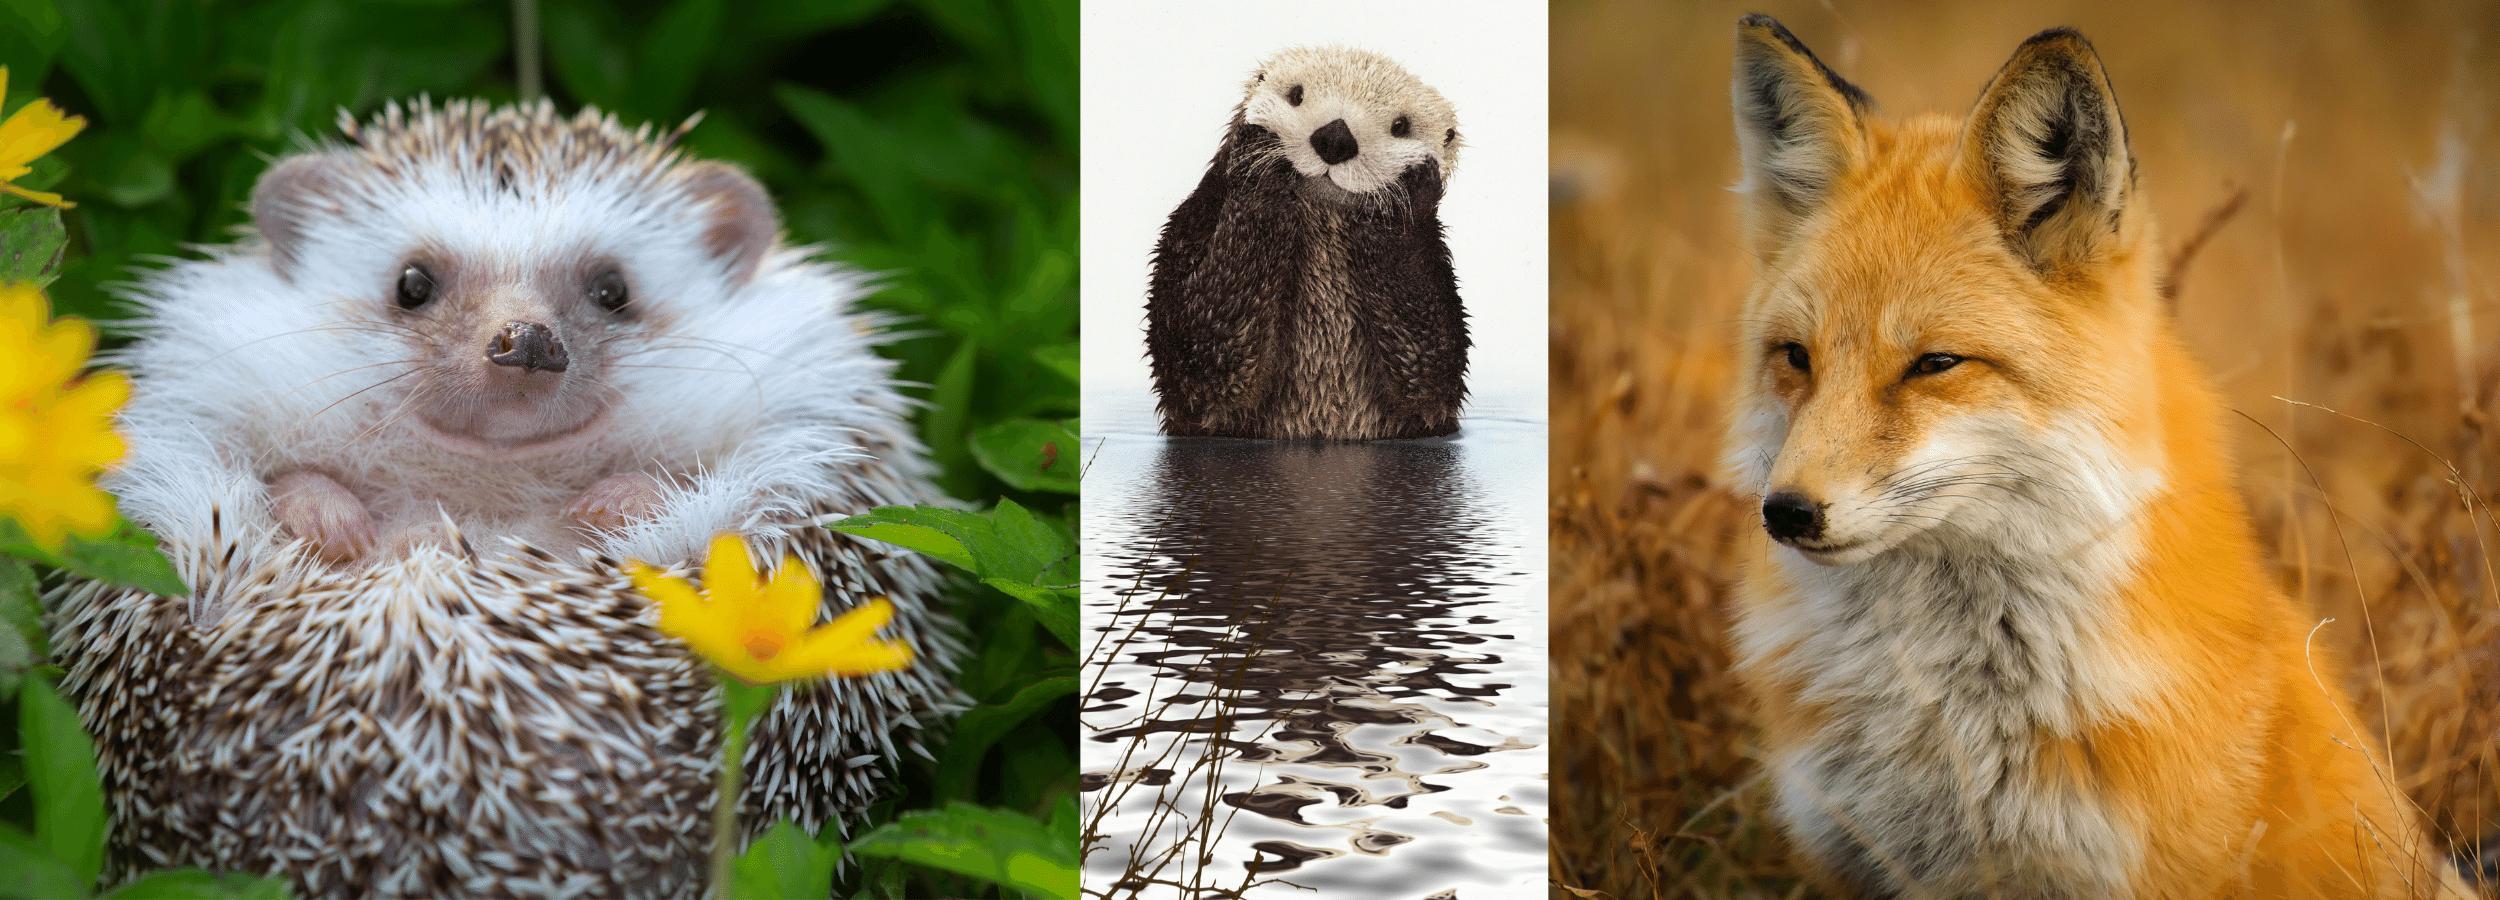 Hedgehog, Otter and Red Fox totem animals